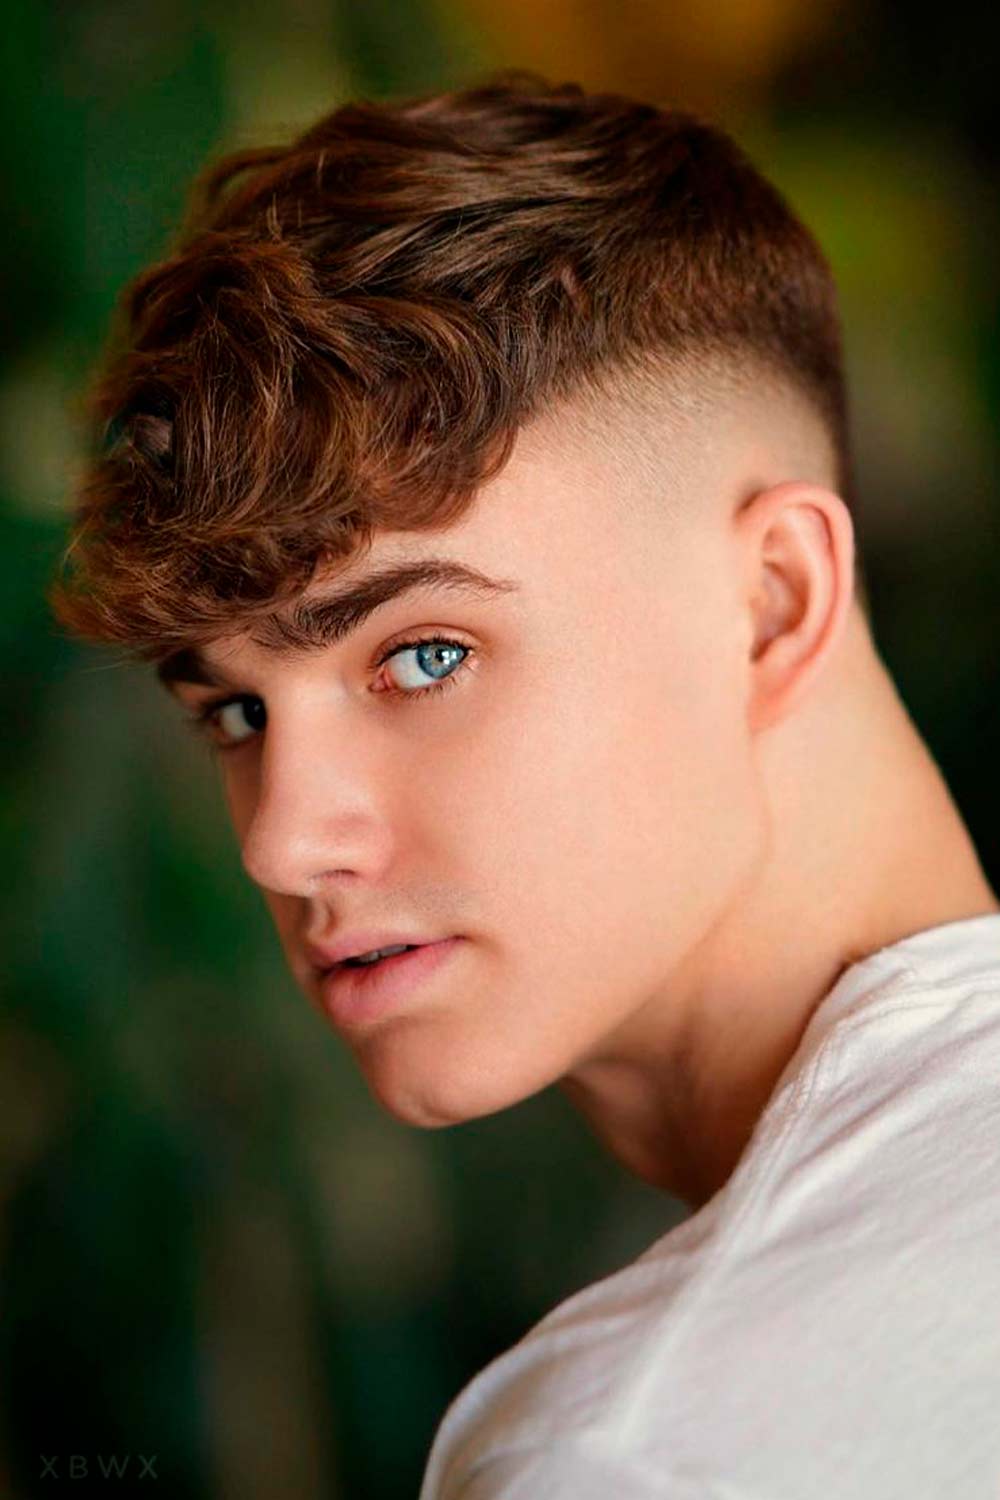 Curly Hairstyles for Men: 6 of the Best Looks in 2020 | All Things Hair ZA